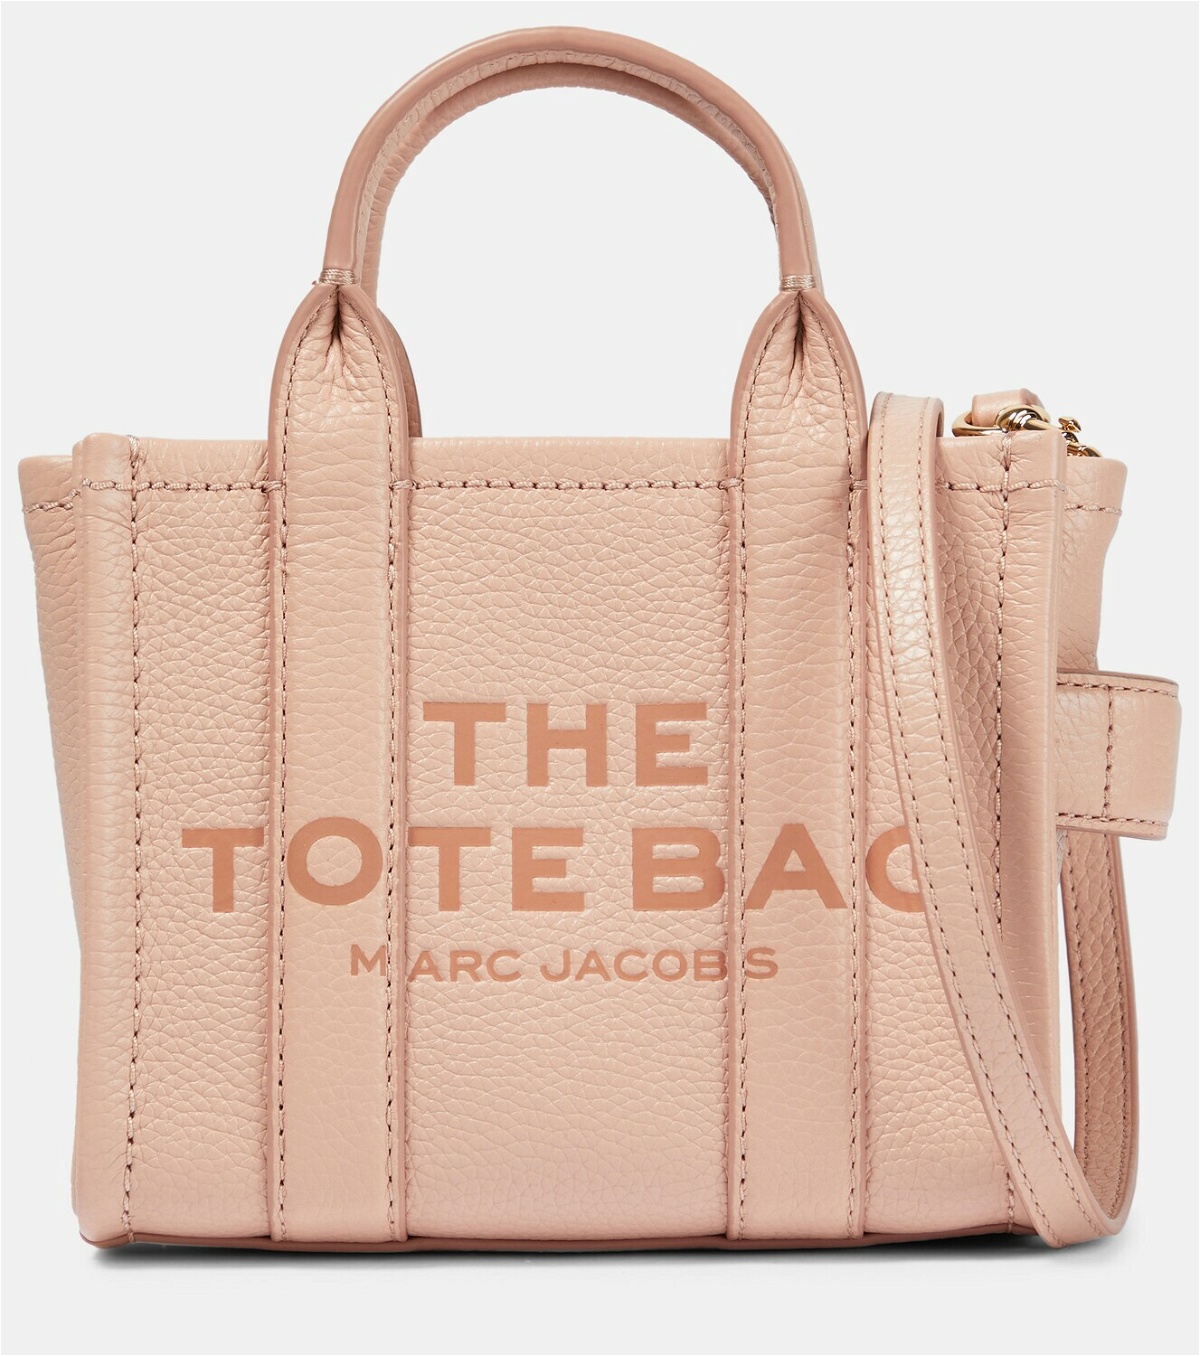 Marc Jacobs - The Micro leather tote bag Marc Jacobs